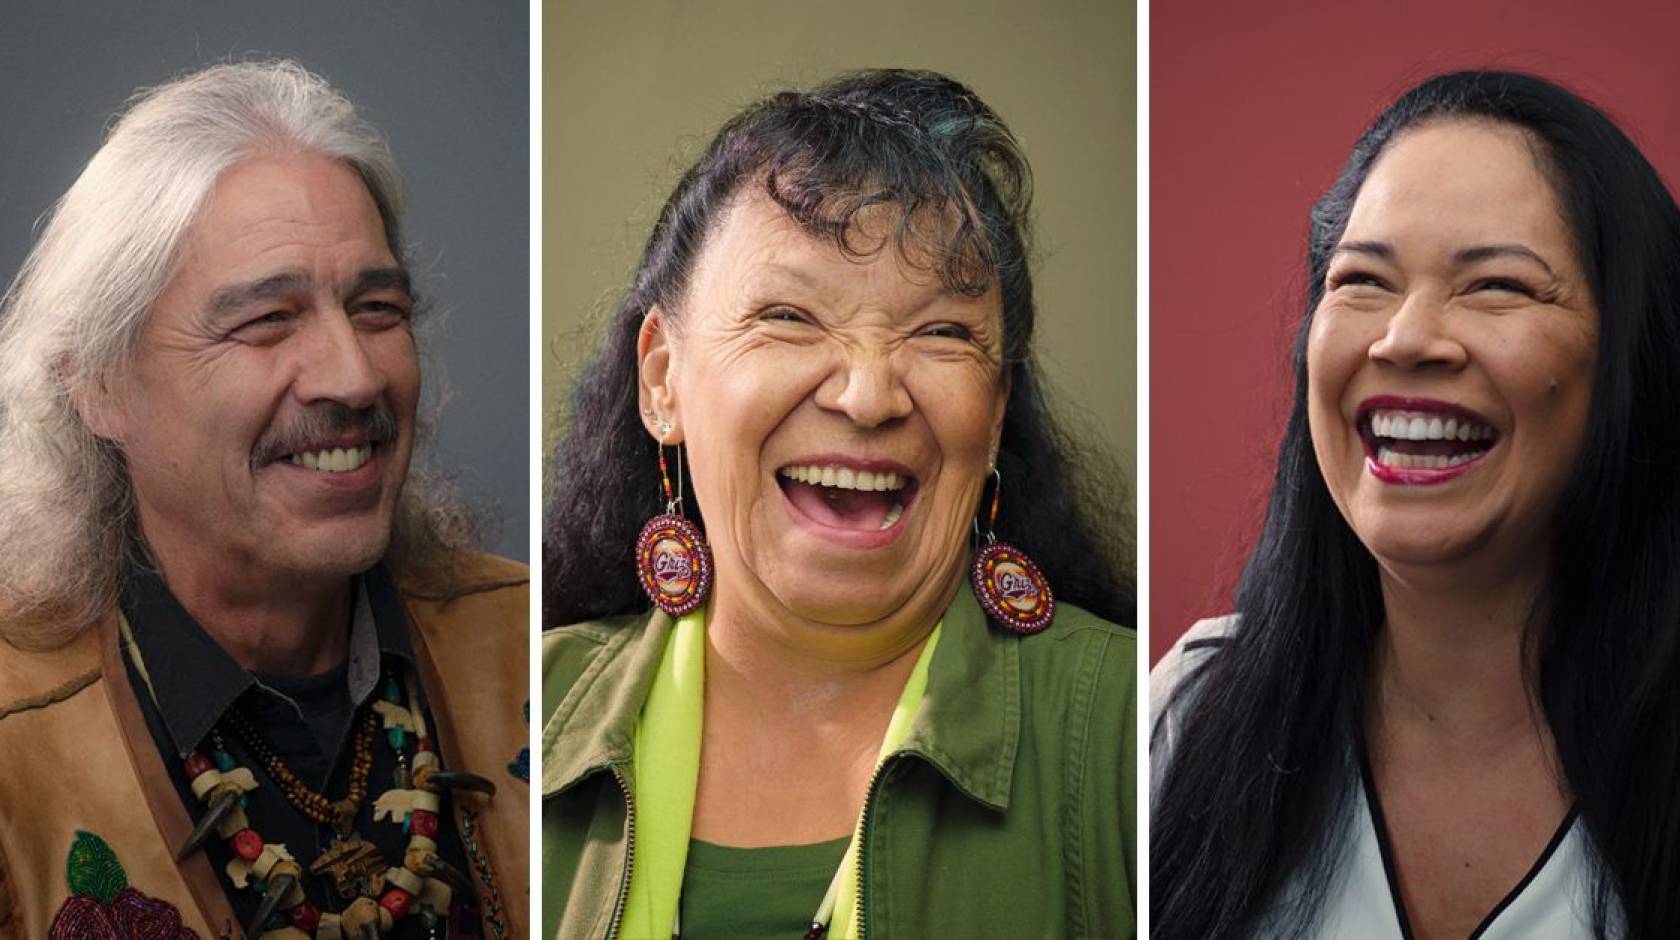 Three laughing Indigenous Native American portraits by Ryan RedCorn